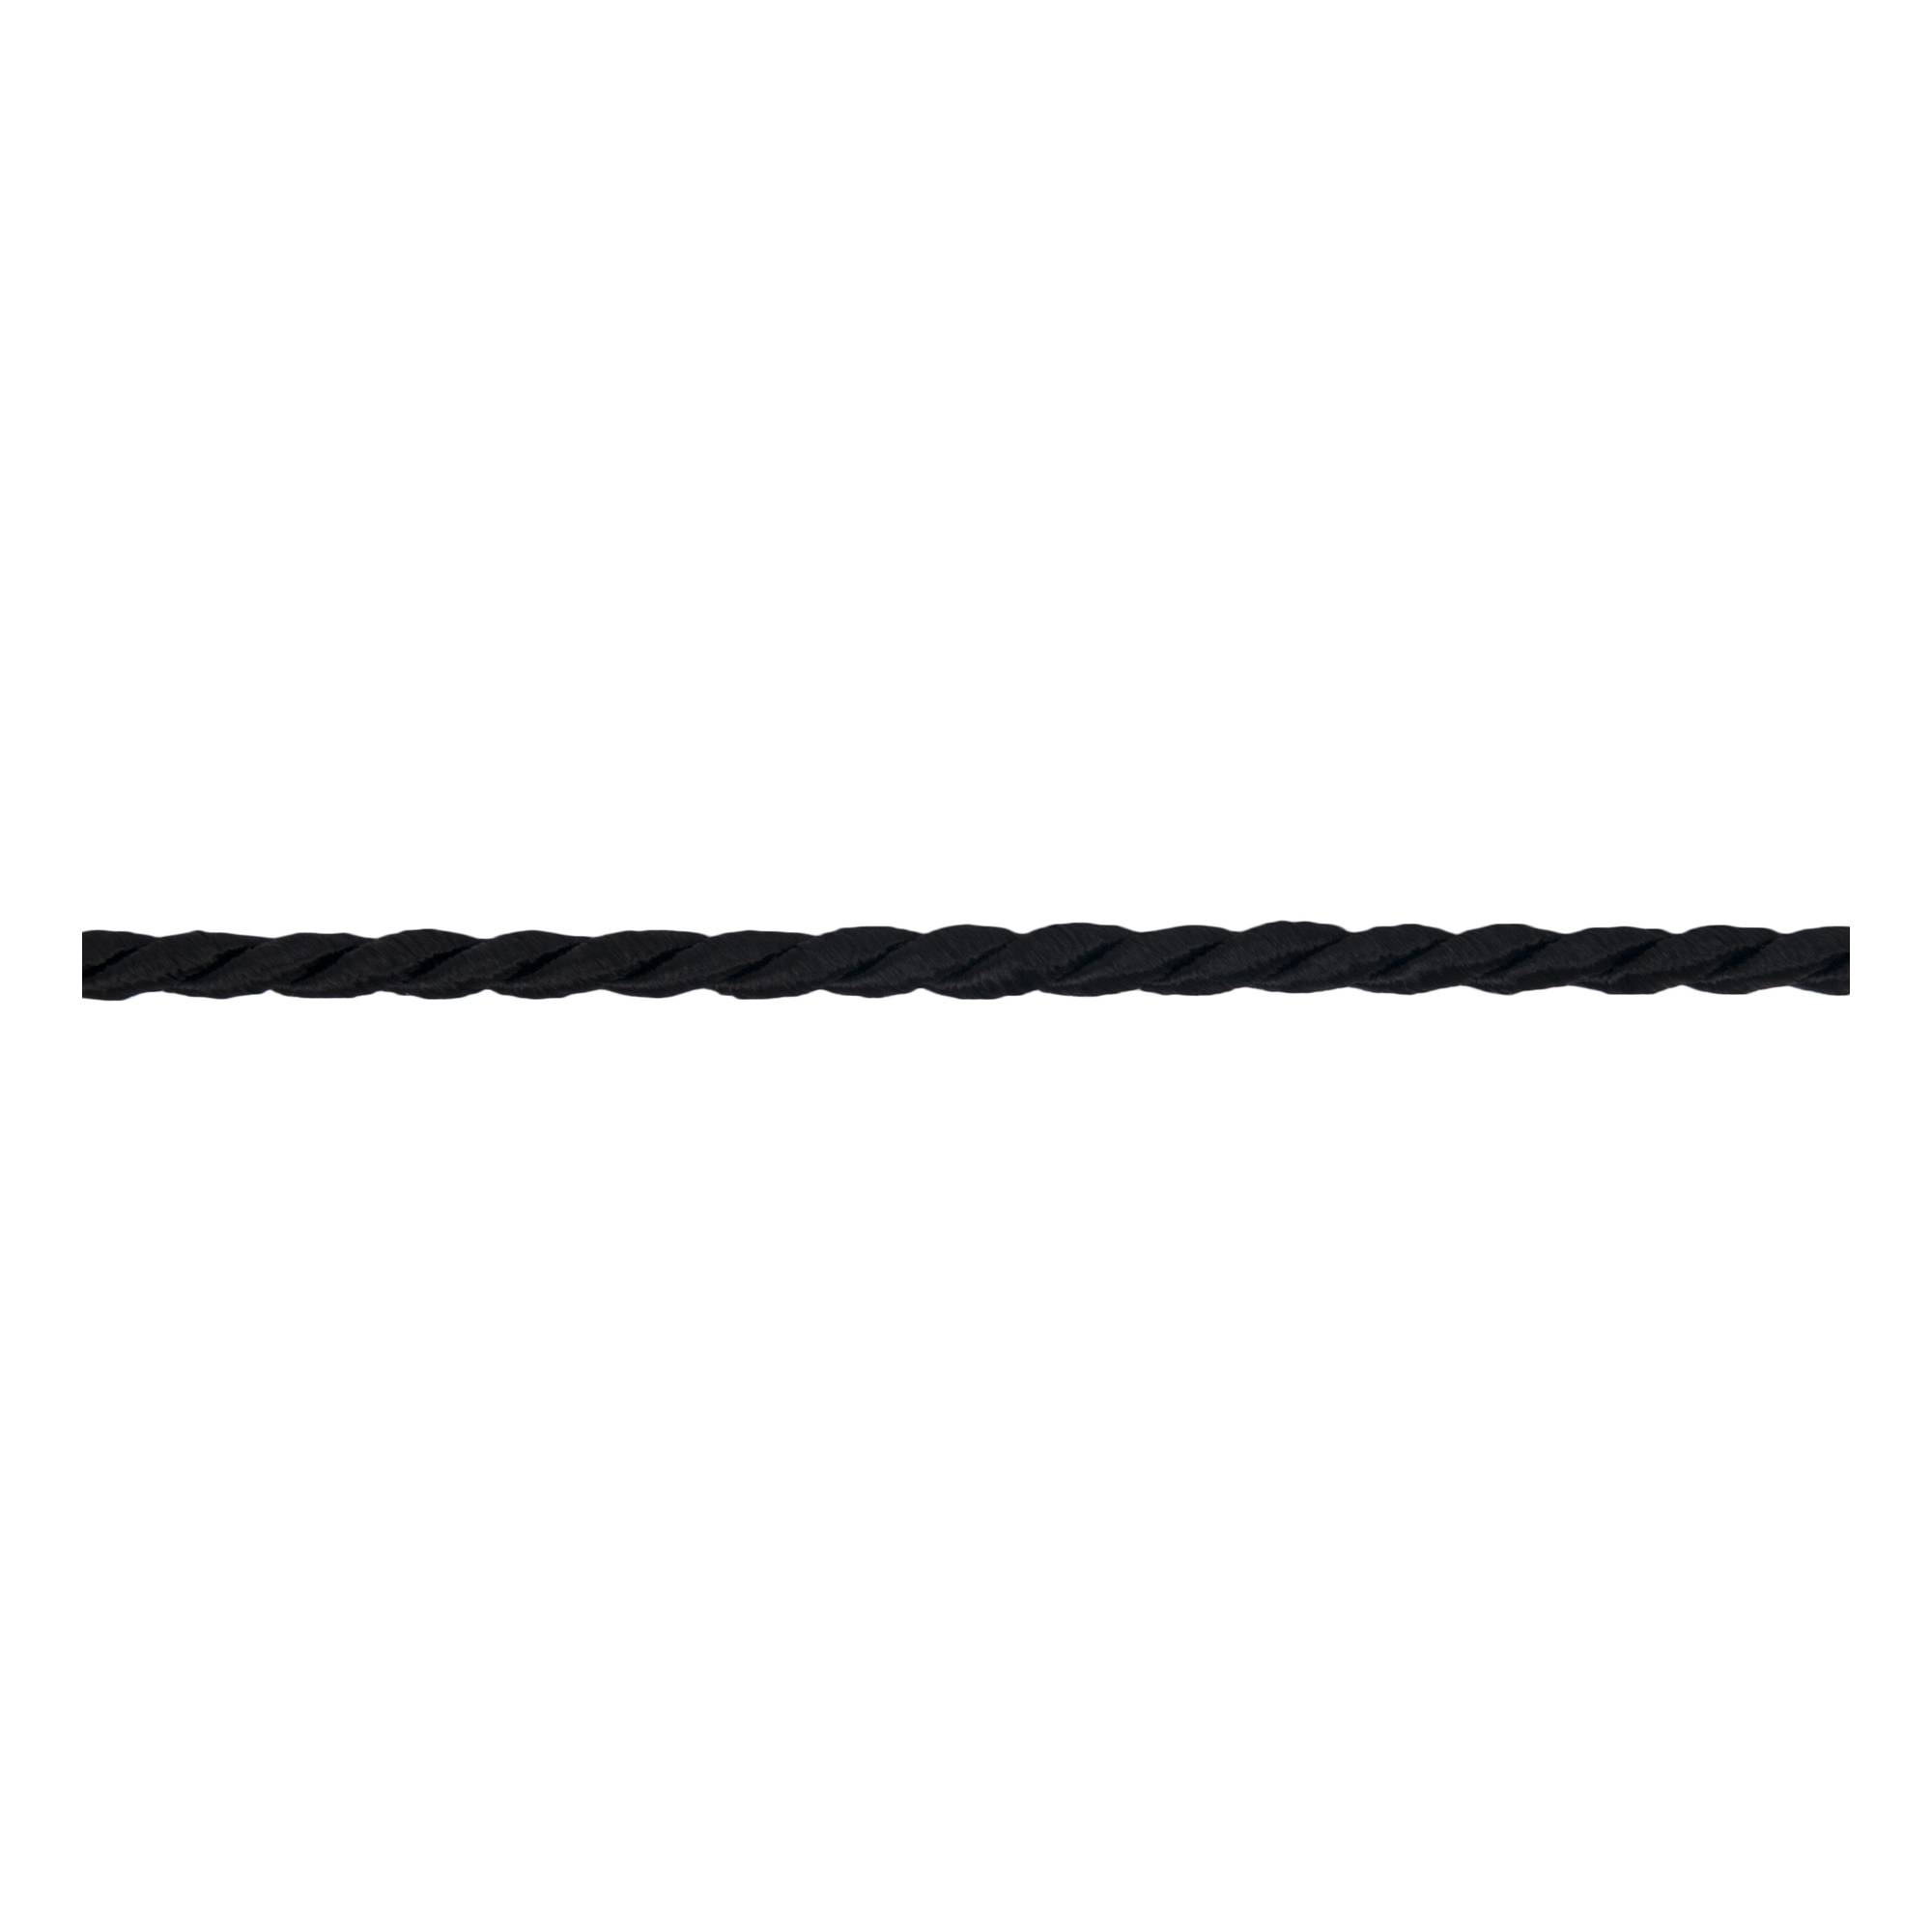 Essential Trimmings Black 3mm Cord Trim by The Metre